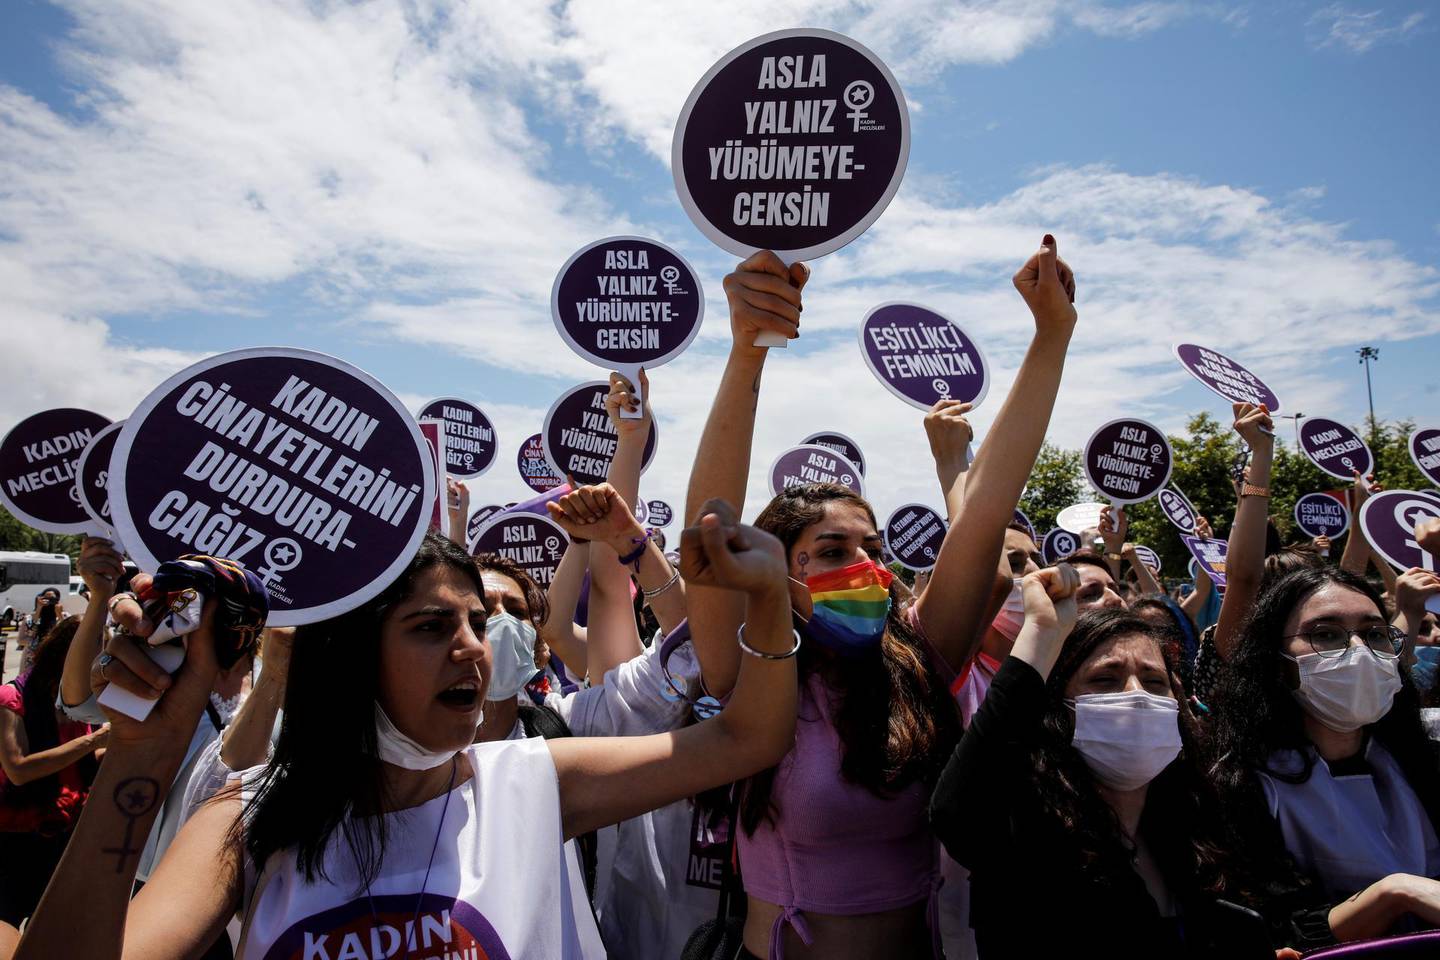 Activists shout slogans and hold signs during a protest against Turkey's withdrawal from the Istanbul Convention, an international accord designed to protect women, in Istanbul, Turkey, June 19, 2021. REUTERS/Umit Bektas